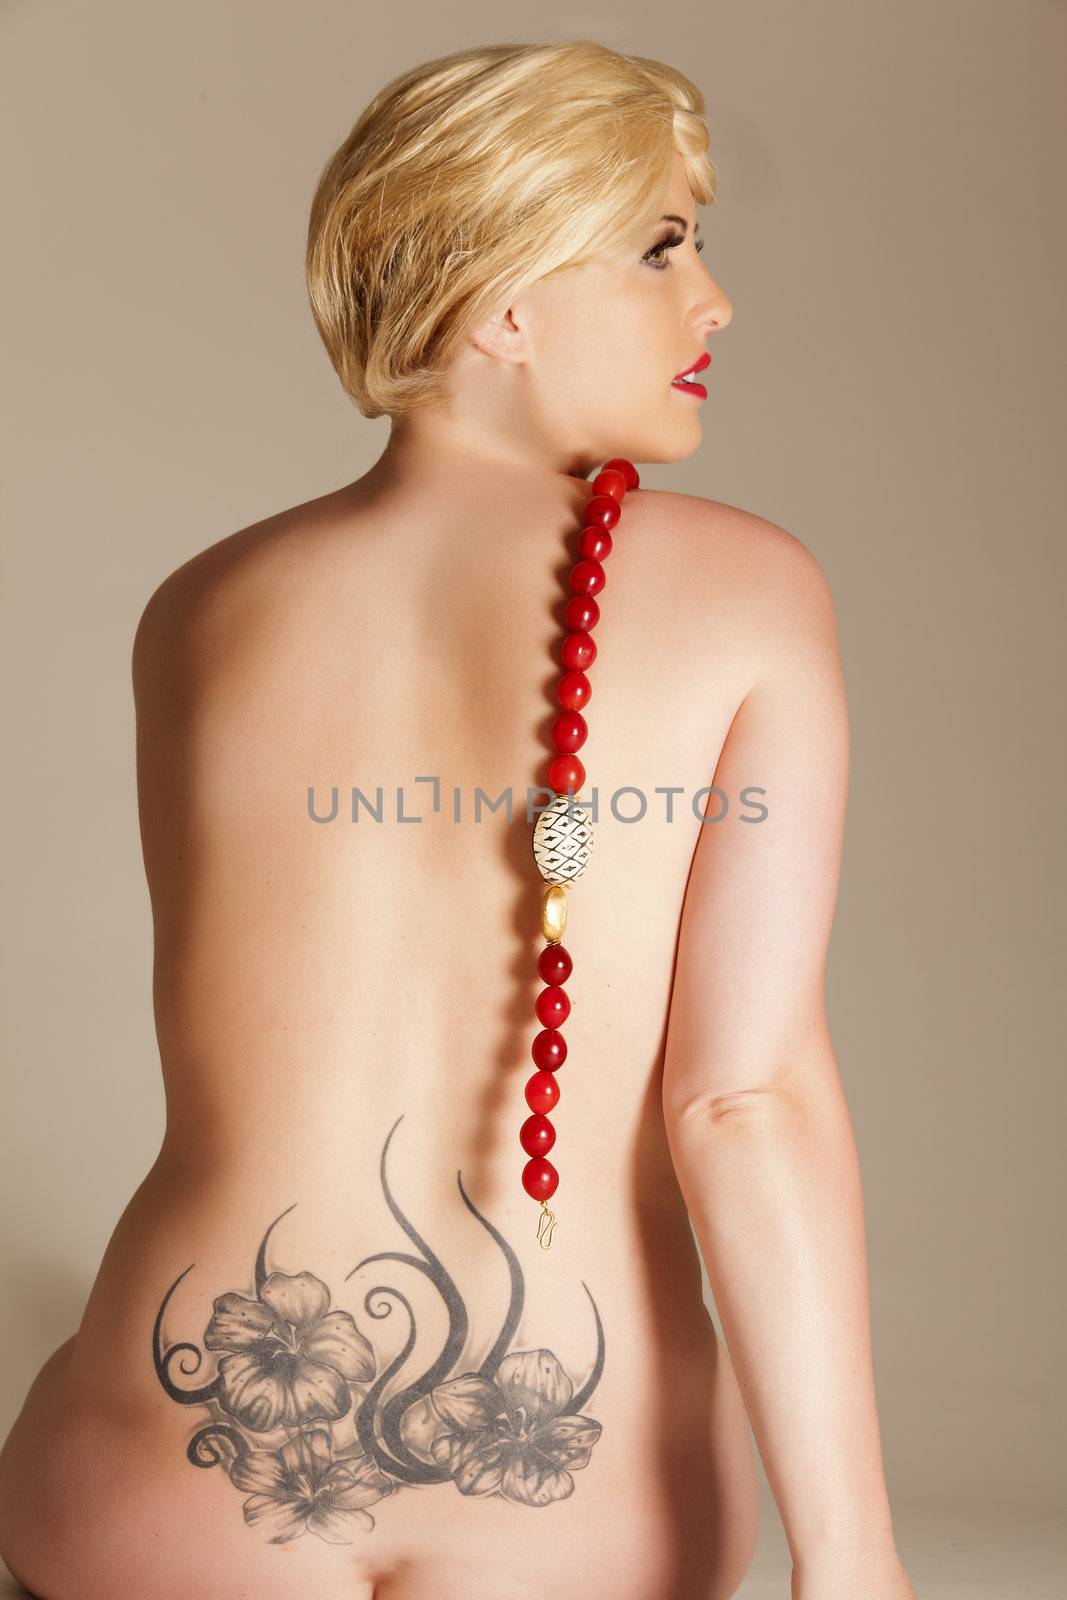 Naked woman from behind with a tattoo designer and chain